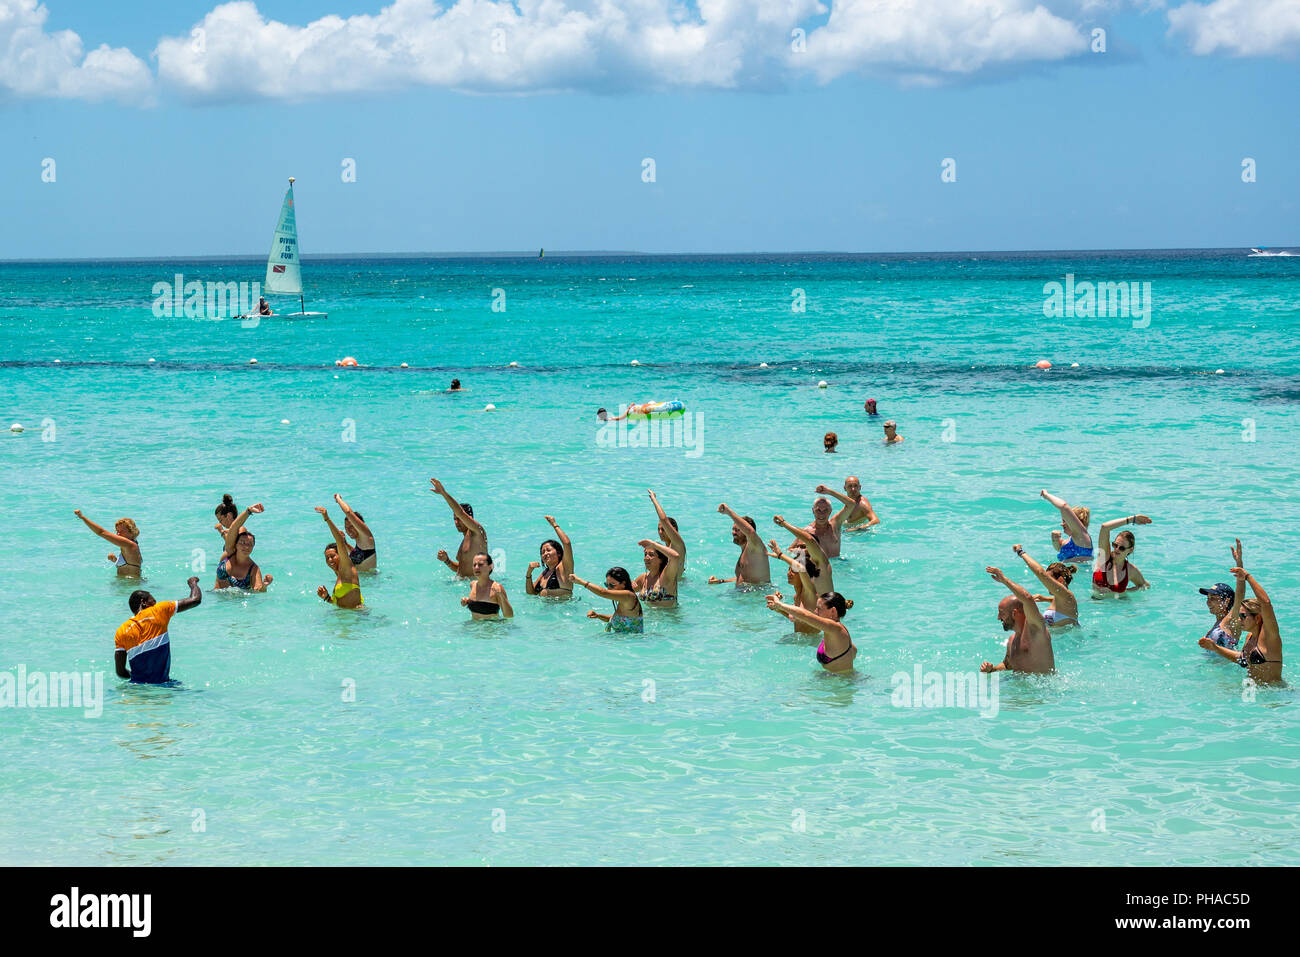 Bayahibe, Dominican Republic, 27 August 2018. An aquafit fitness class for tourists at a Caribbean sea resort. Photo by Enrique Shore Stock Photo